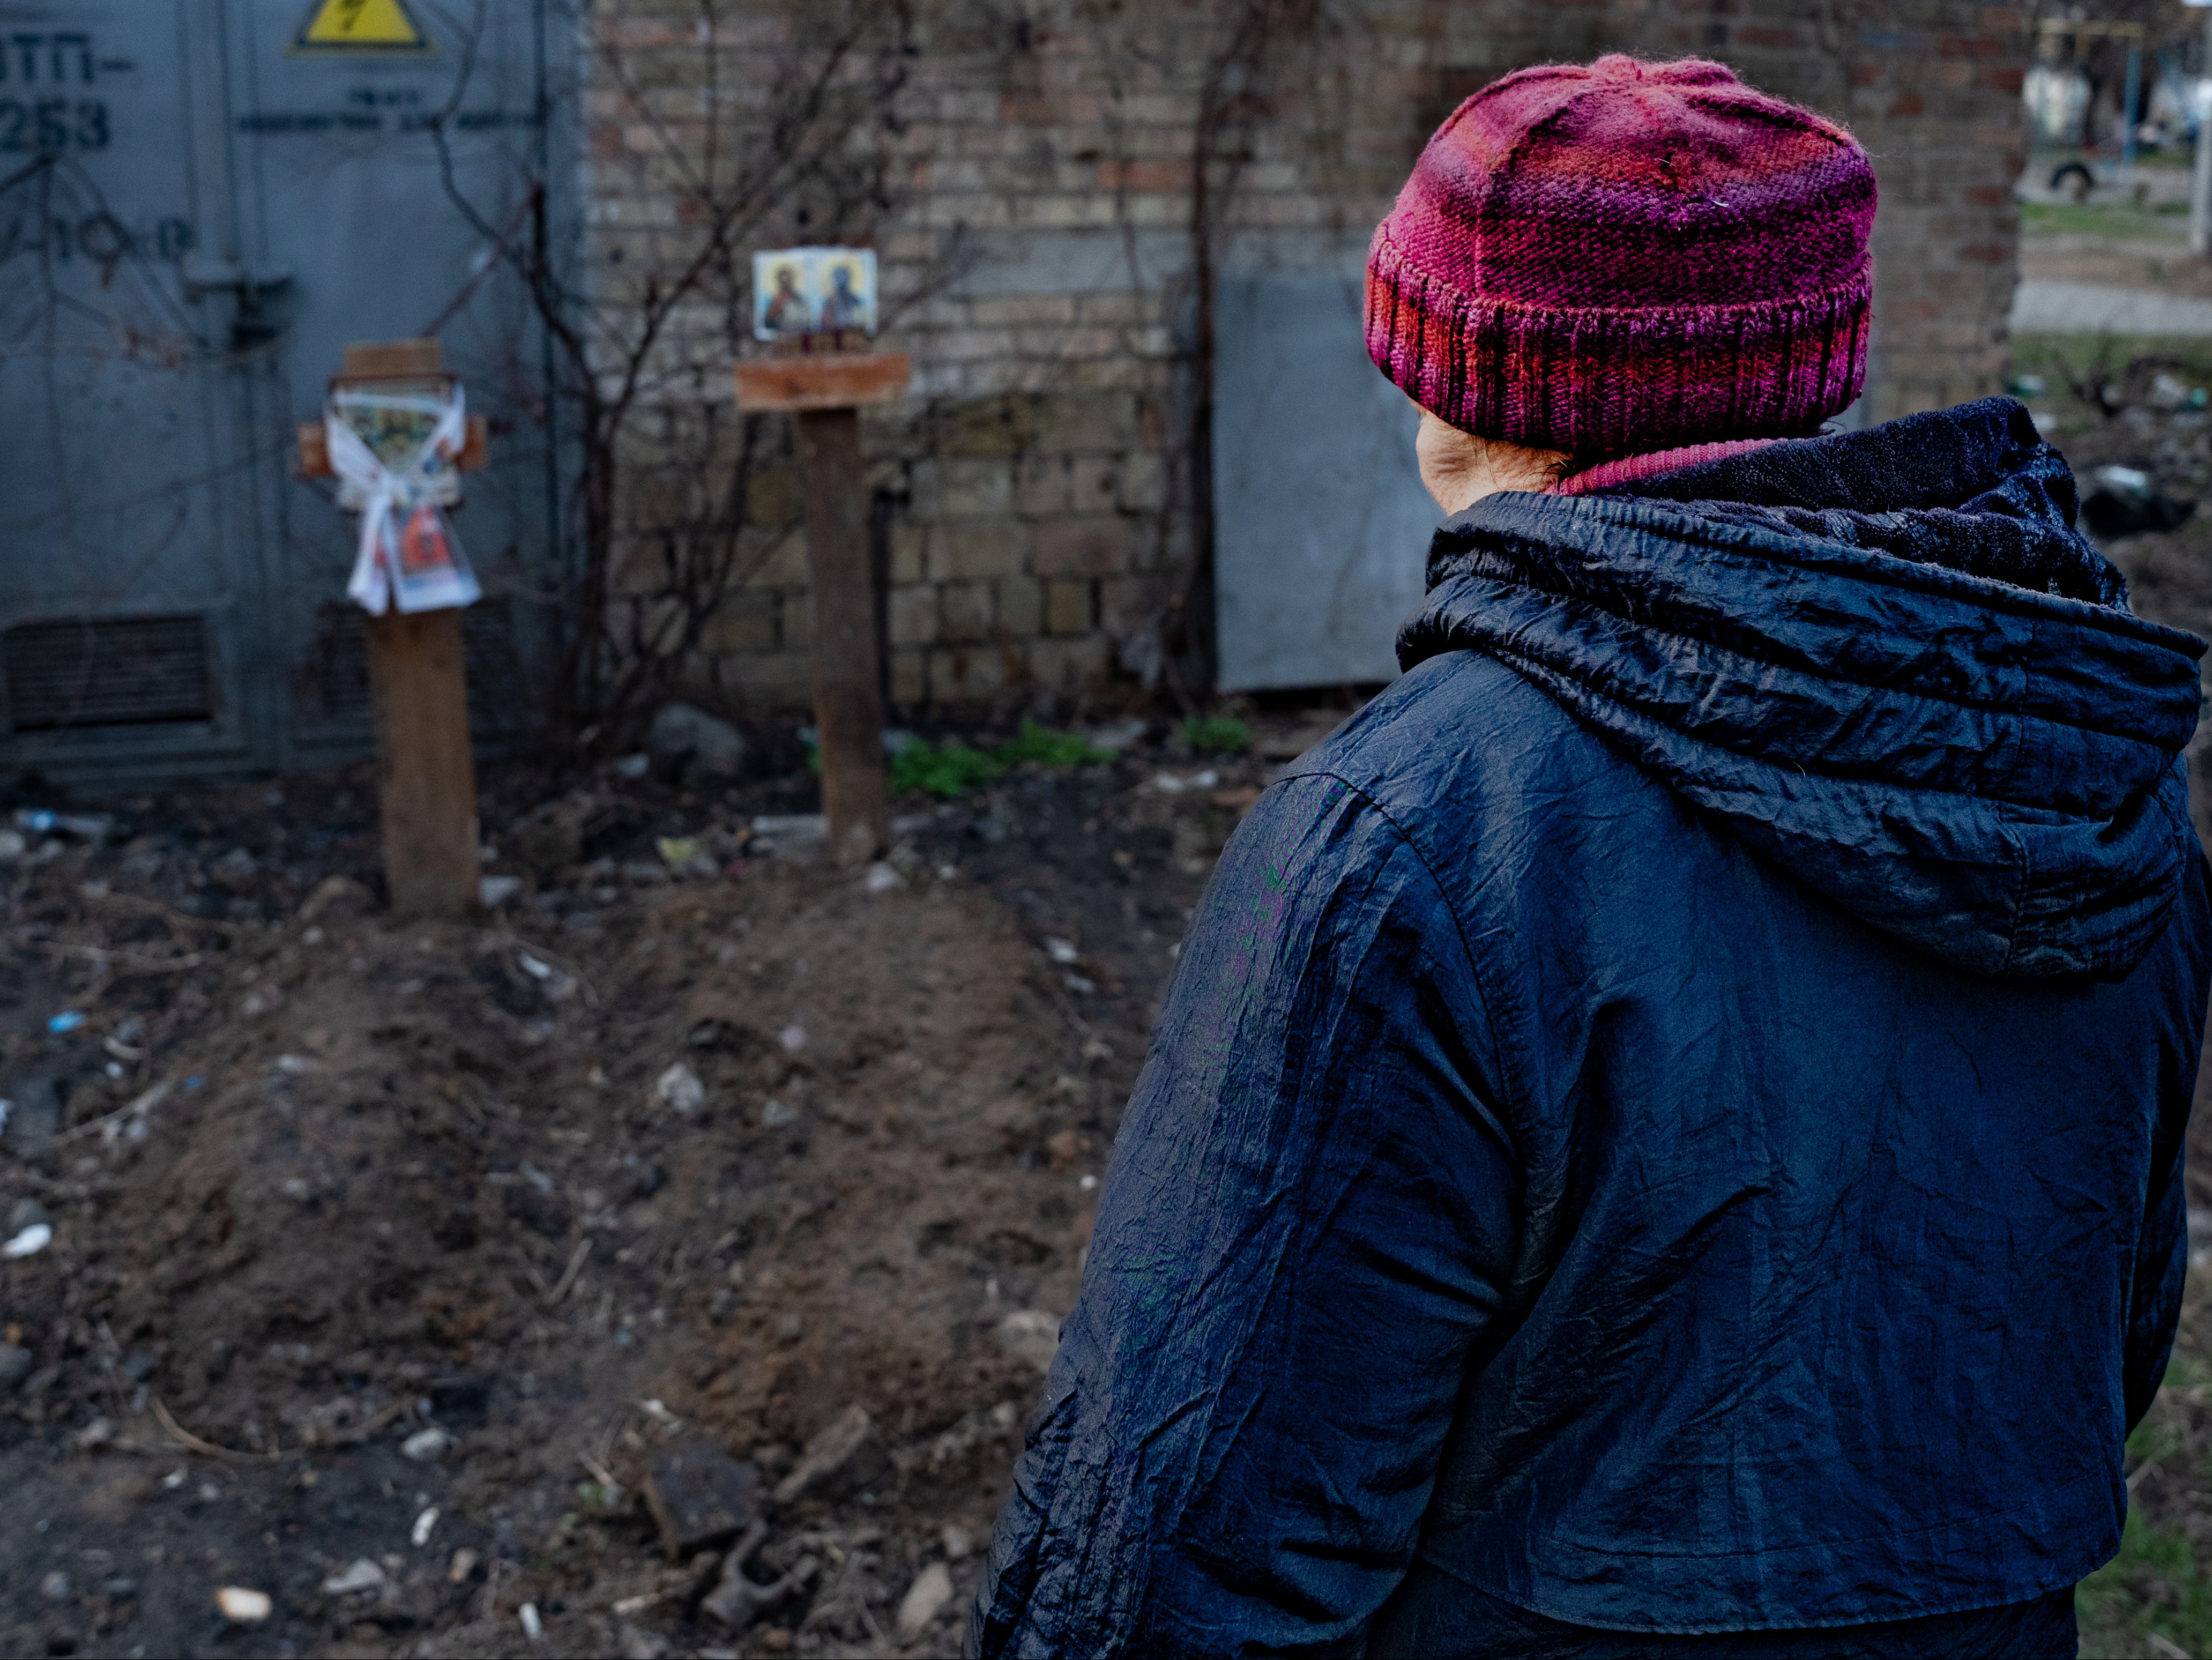 Helena prays by the graves she helped dig outside her flat window in Bucha